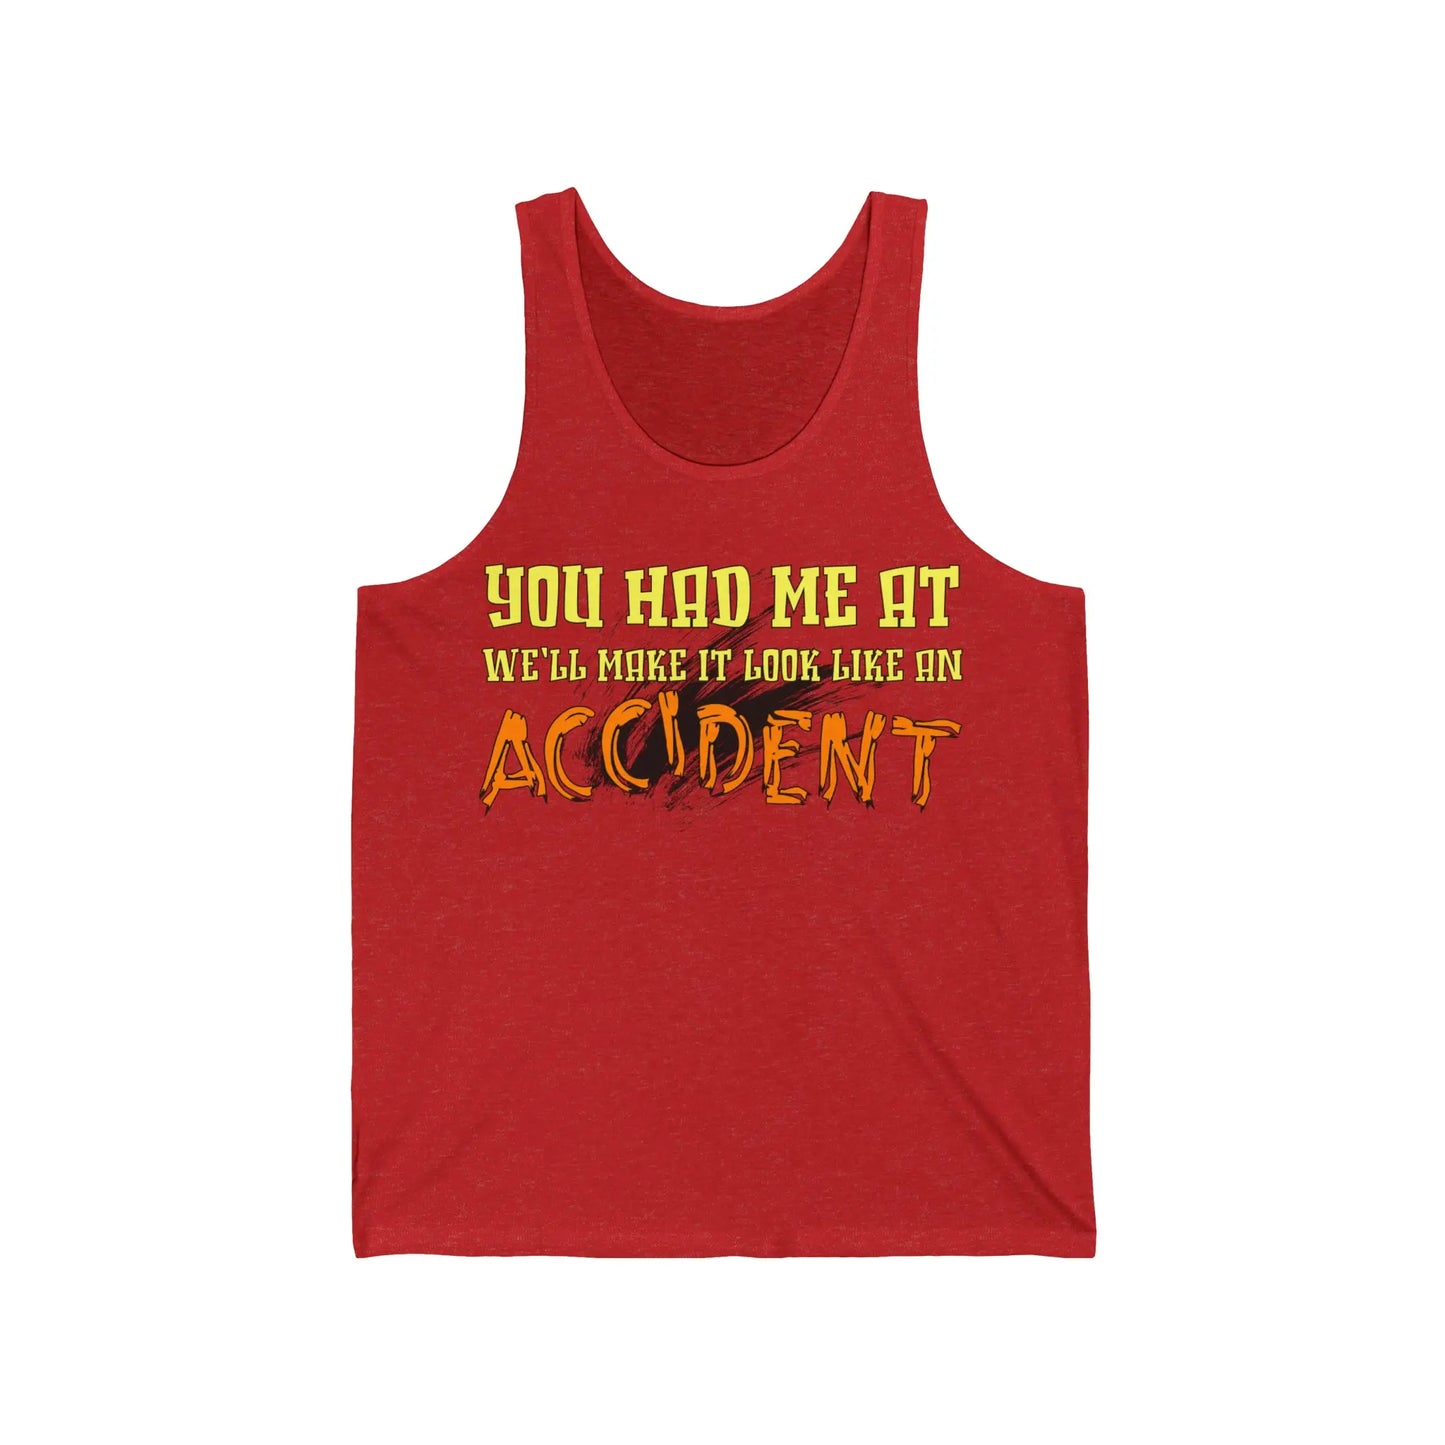 Make It Look Like An Accident Men's Tank - Wicked Tees